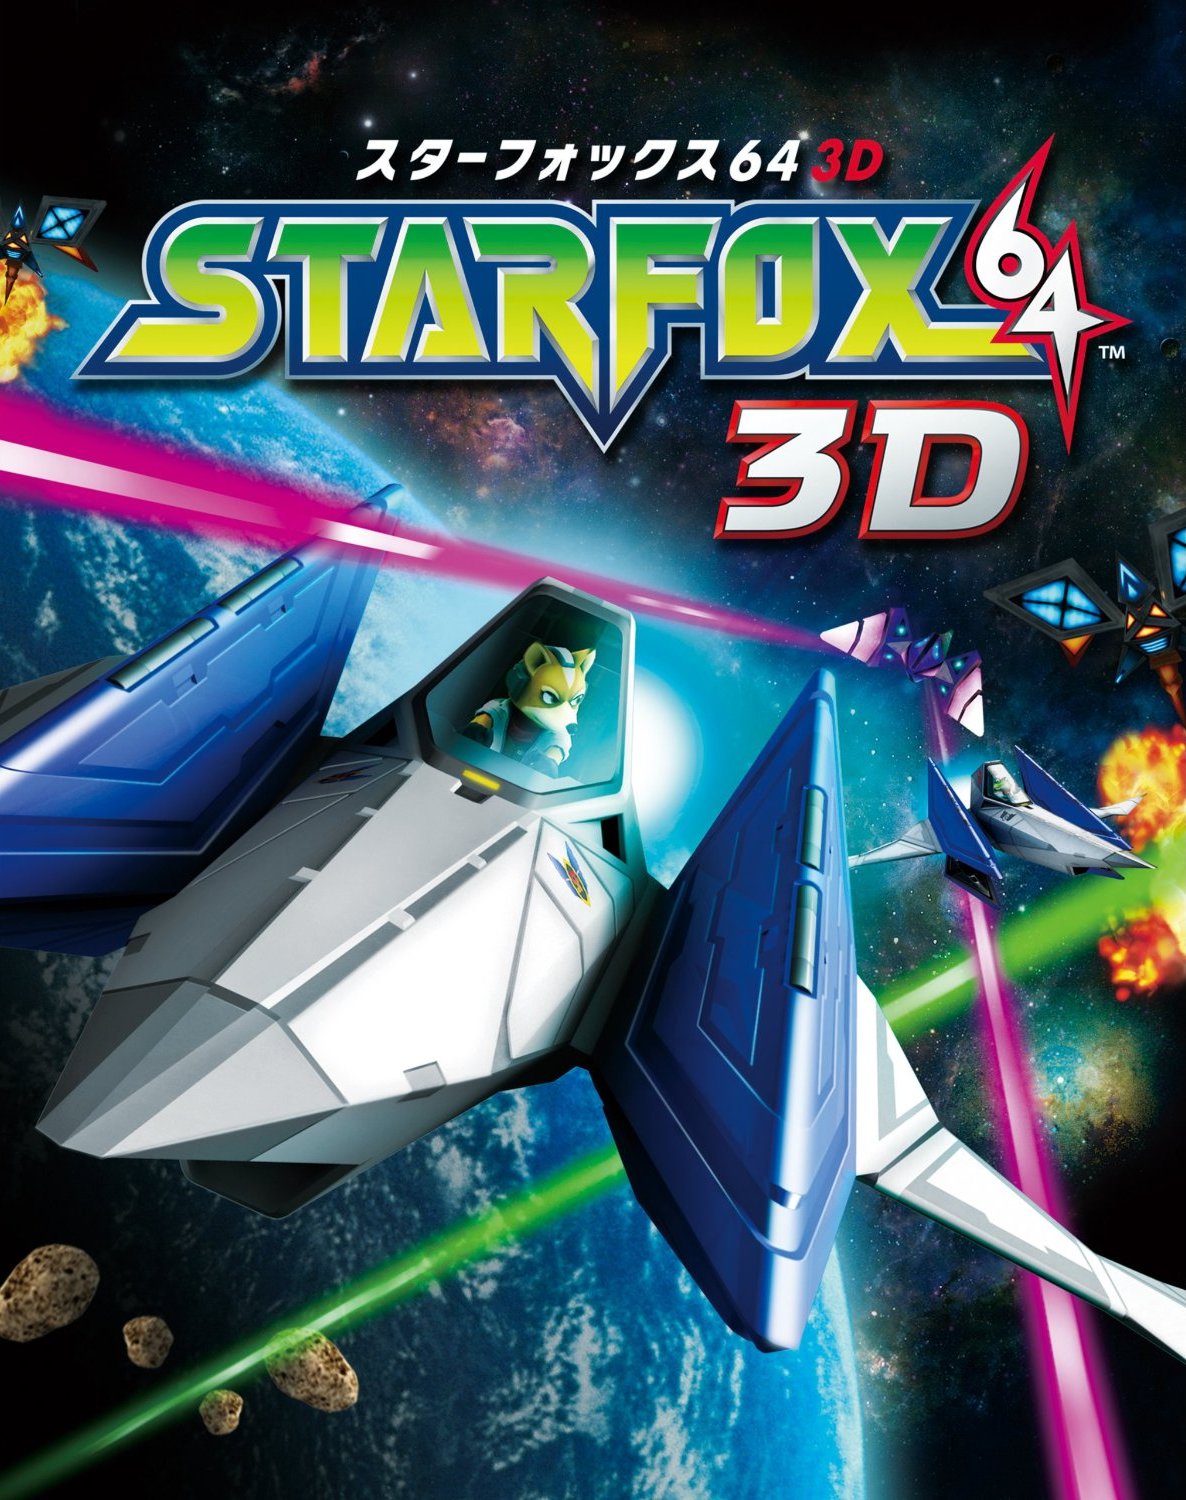 STAR FOX 64 3D (Nintendo 3DS,2011) Game,manual, Extras for